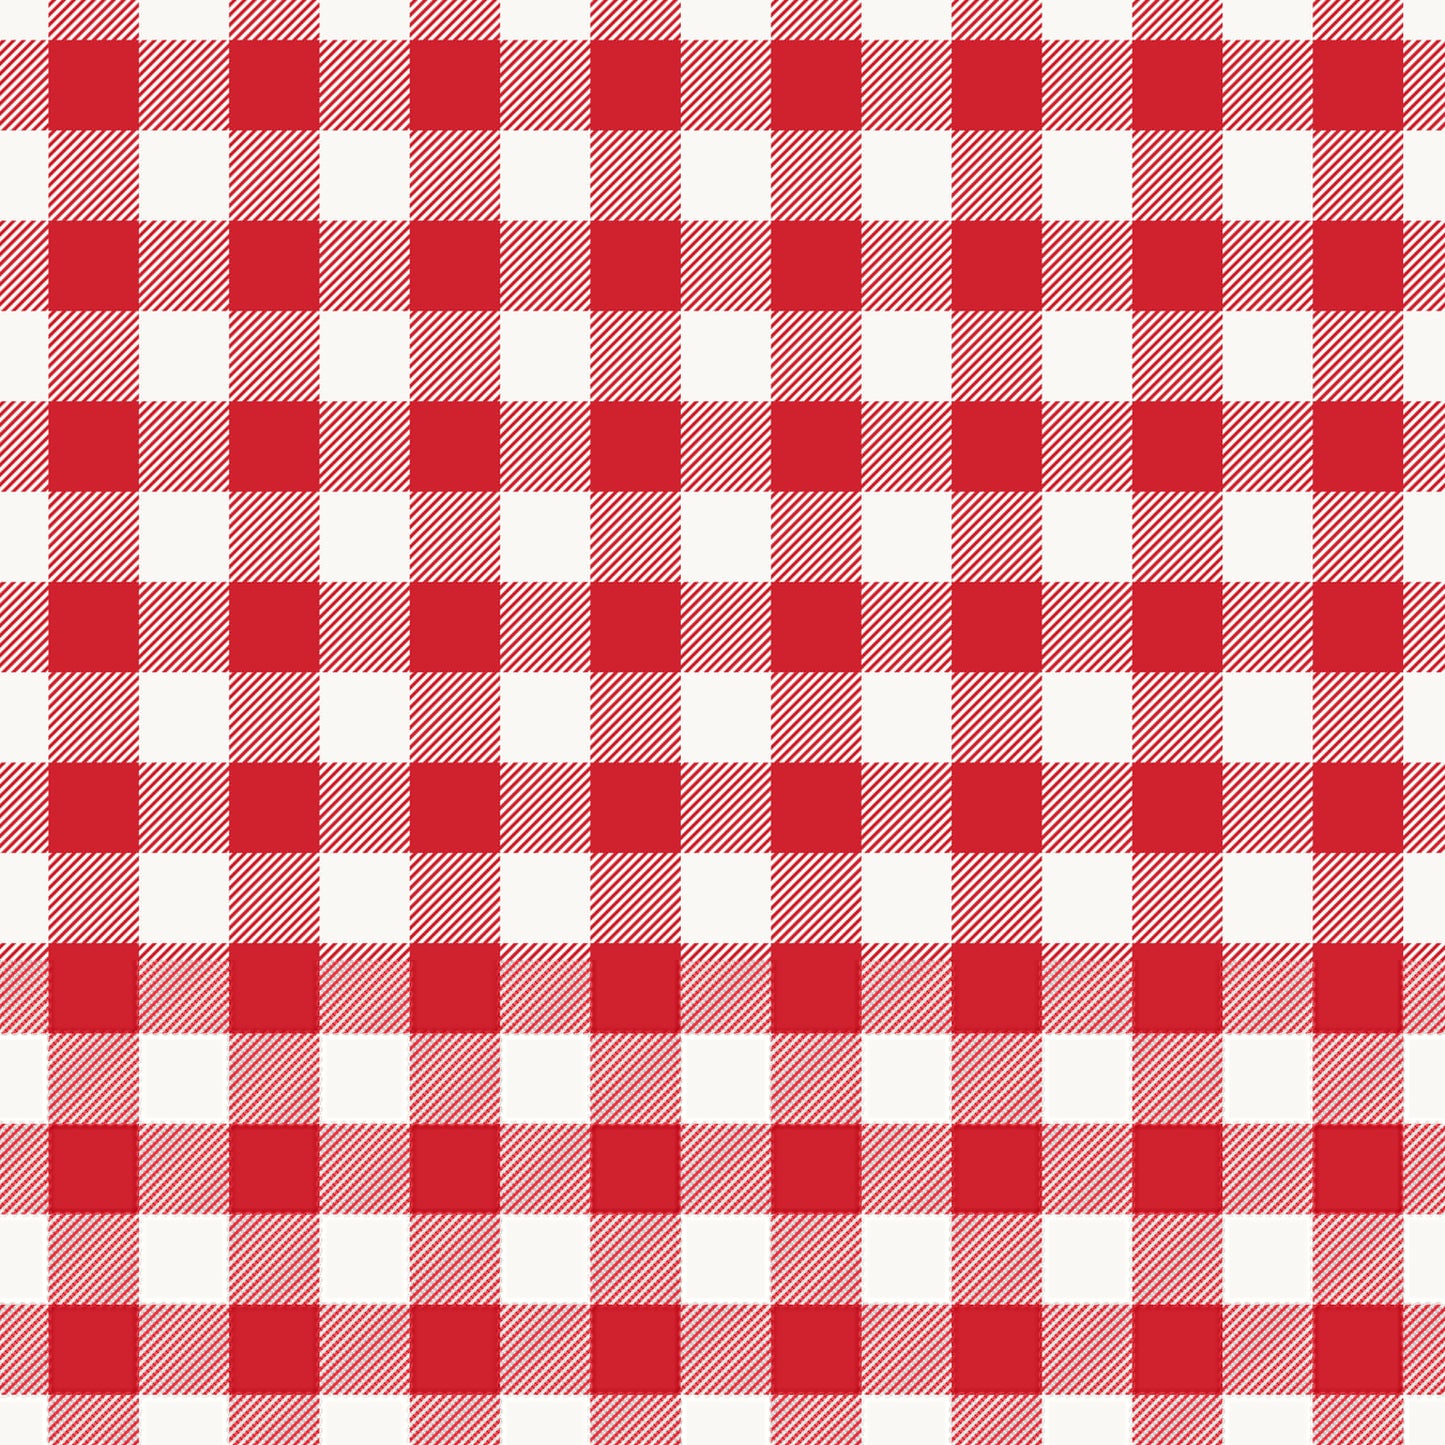 Red gingham